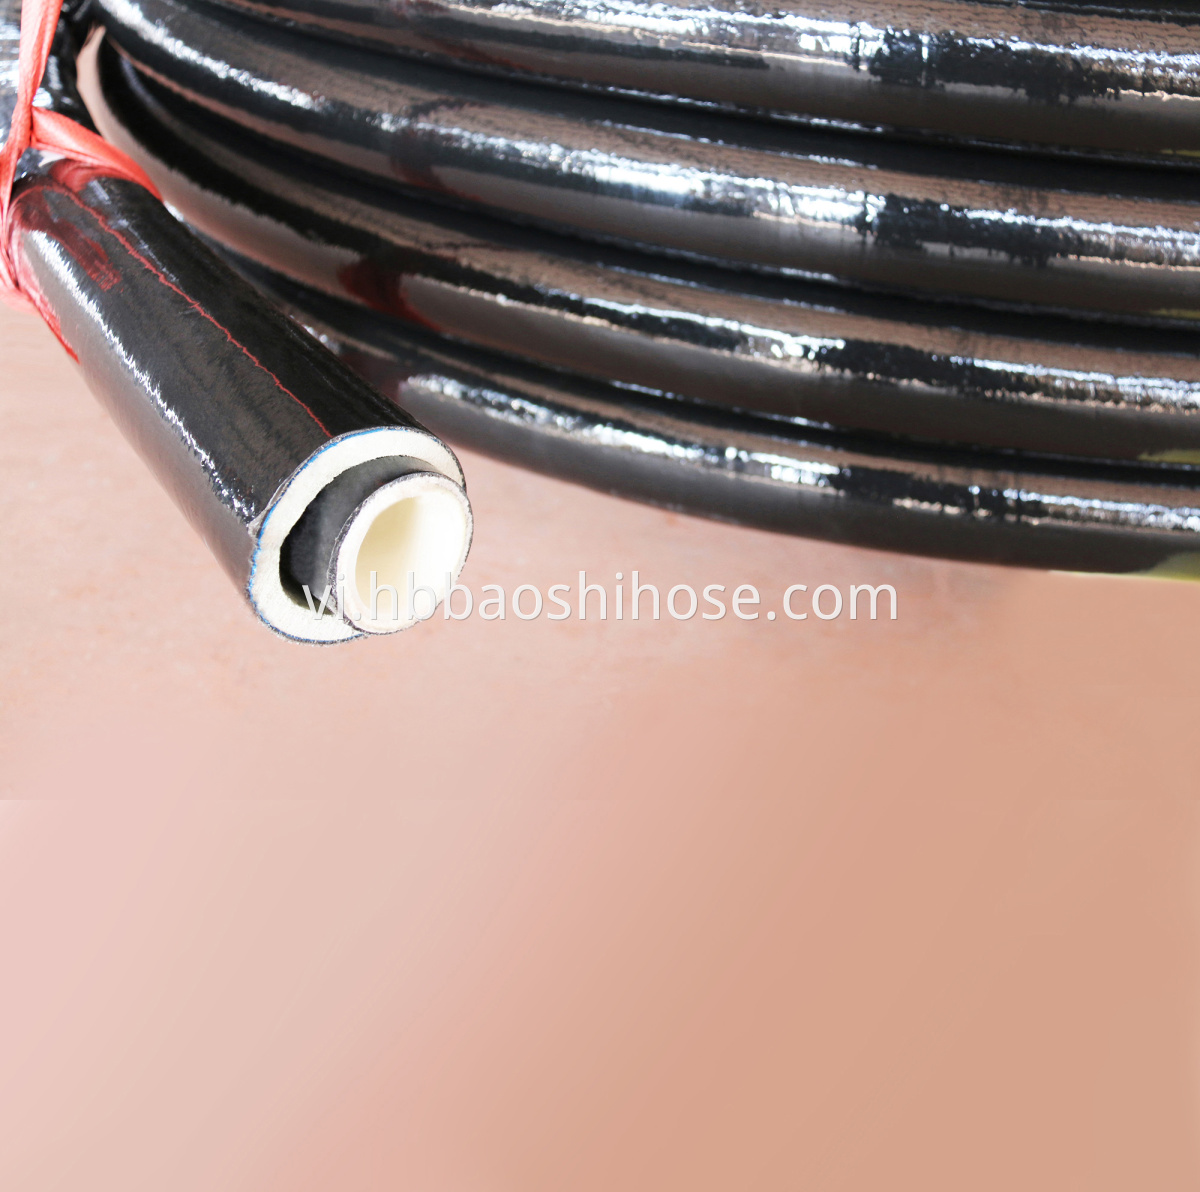 Composite Alcohol Transmission Pipe